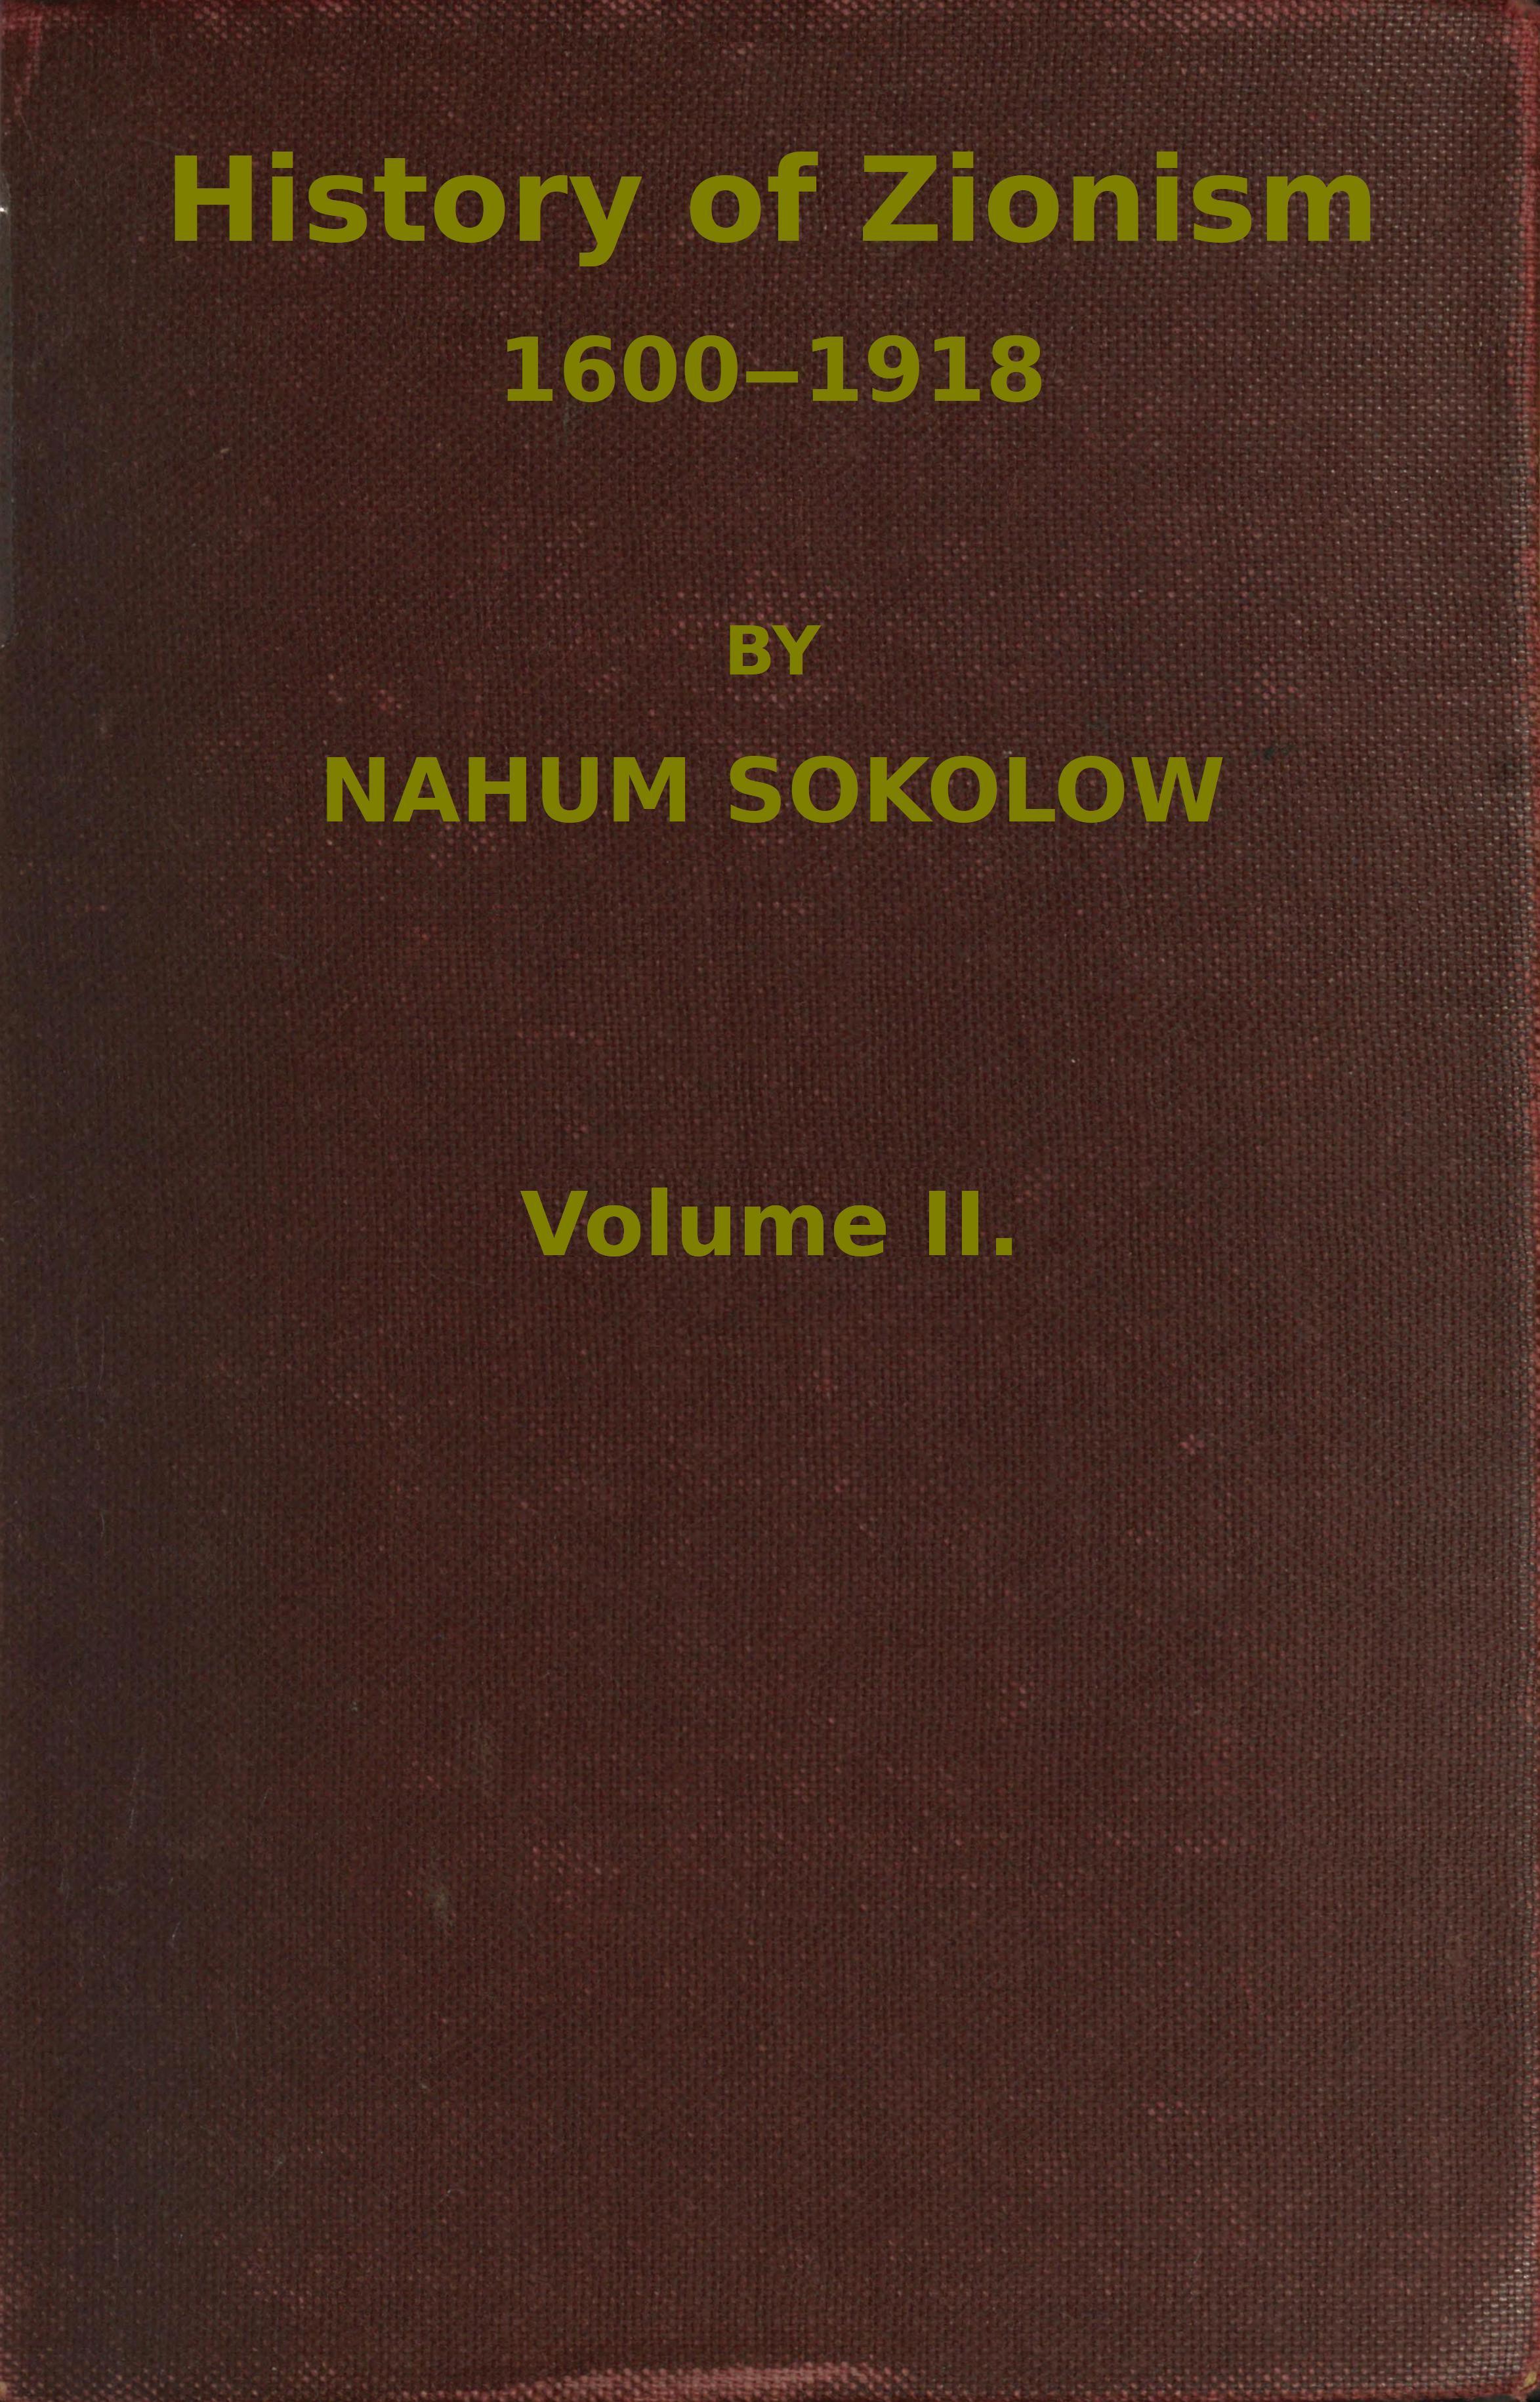 History of Zionism, by Nahum Sokolow A Project Gutenberg eBook pic pic